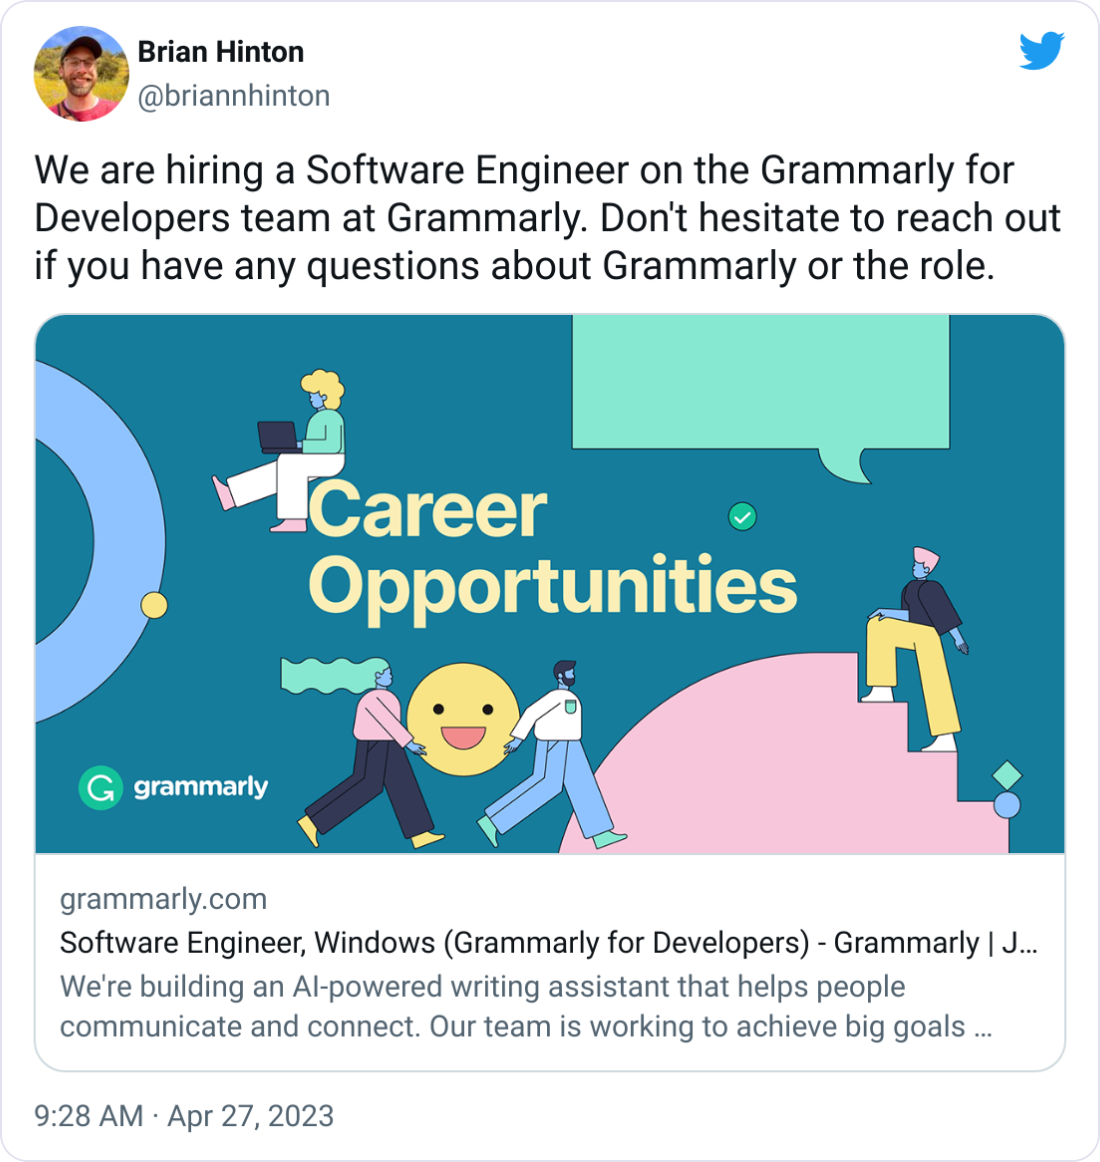 Brian Hinton @briannhinton We are hiring a Software Engineer on the Grammarly for Developers team at Grammarly. Don't hesitate to reach out if you have any questions about Grammarly or the role.